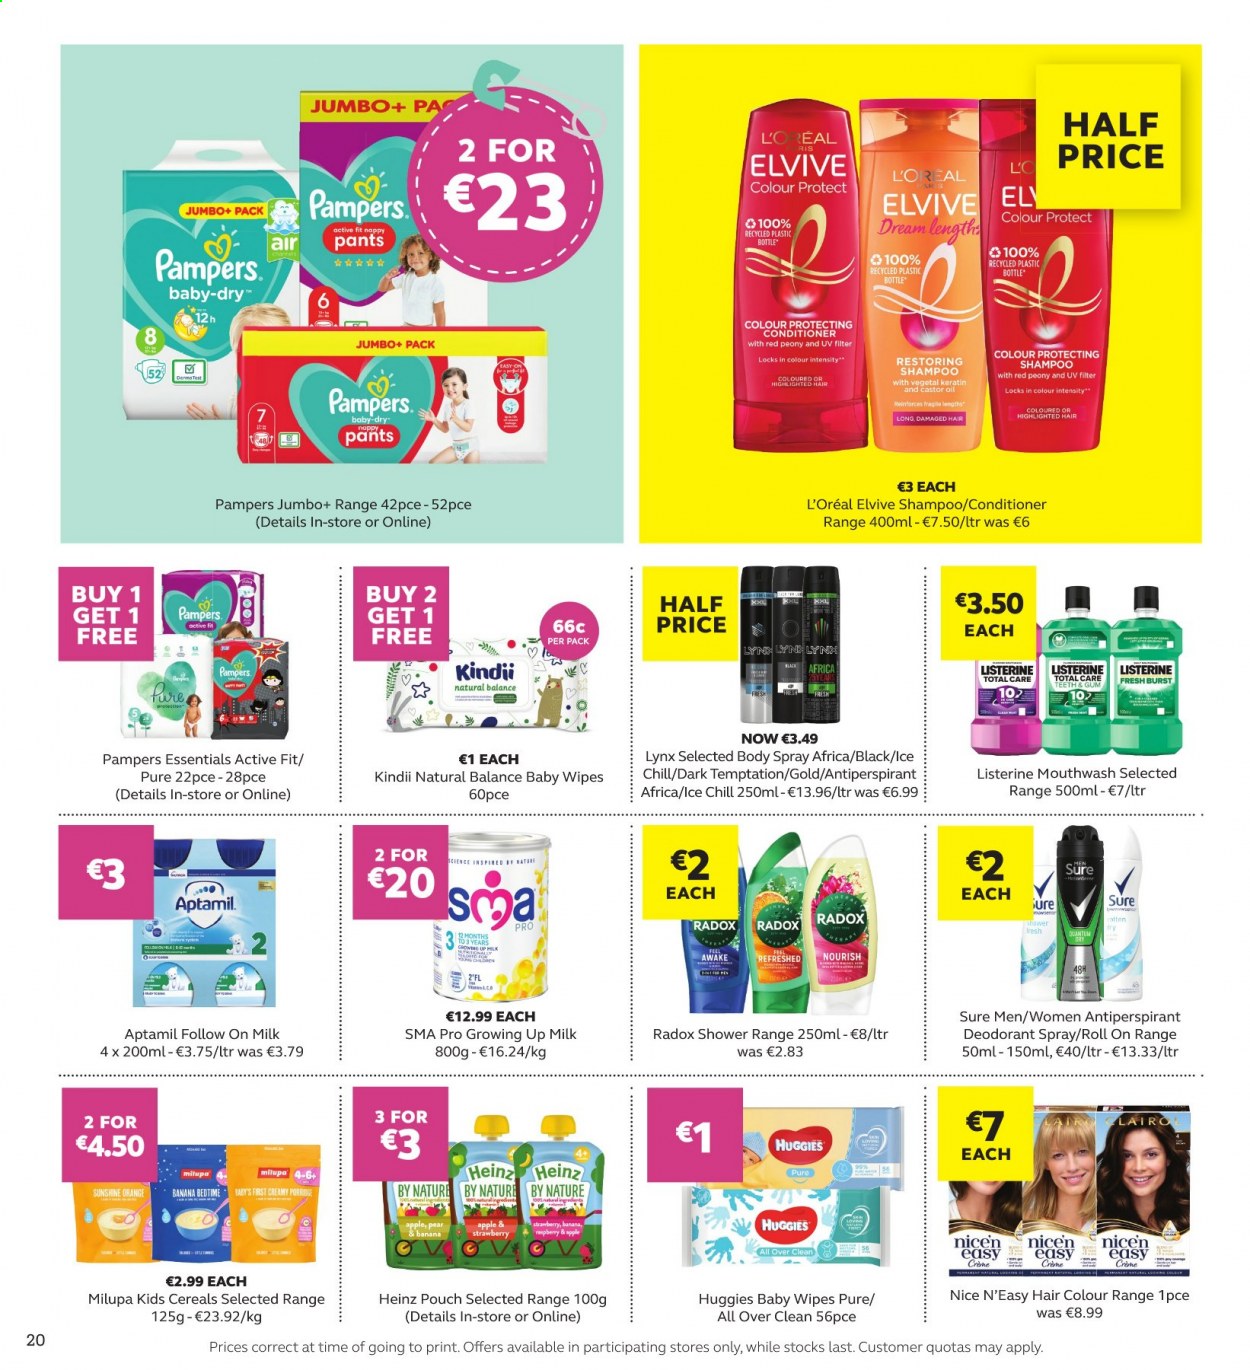 thumbnail - SuperValu offer  - 25.03.2021 - 07.04.2021 - Sales products - oranges, milk, Sunshine, Heinz, cereals, oil, Huggies, Pampers, baby wipes, nappies, wipes, shampoo, shower gel, Radox, Listerine, mouthwash, L’Oréal, conditioner, hair color, keratin, body spray, anti-perspirant, roll-on, Sure, deodorant, Natural Balance. Page 20.